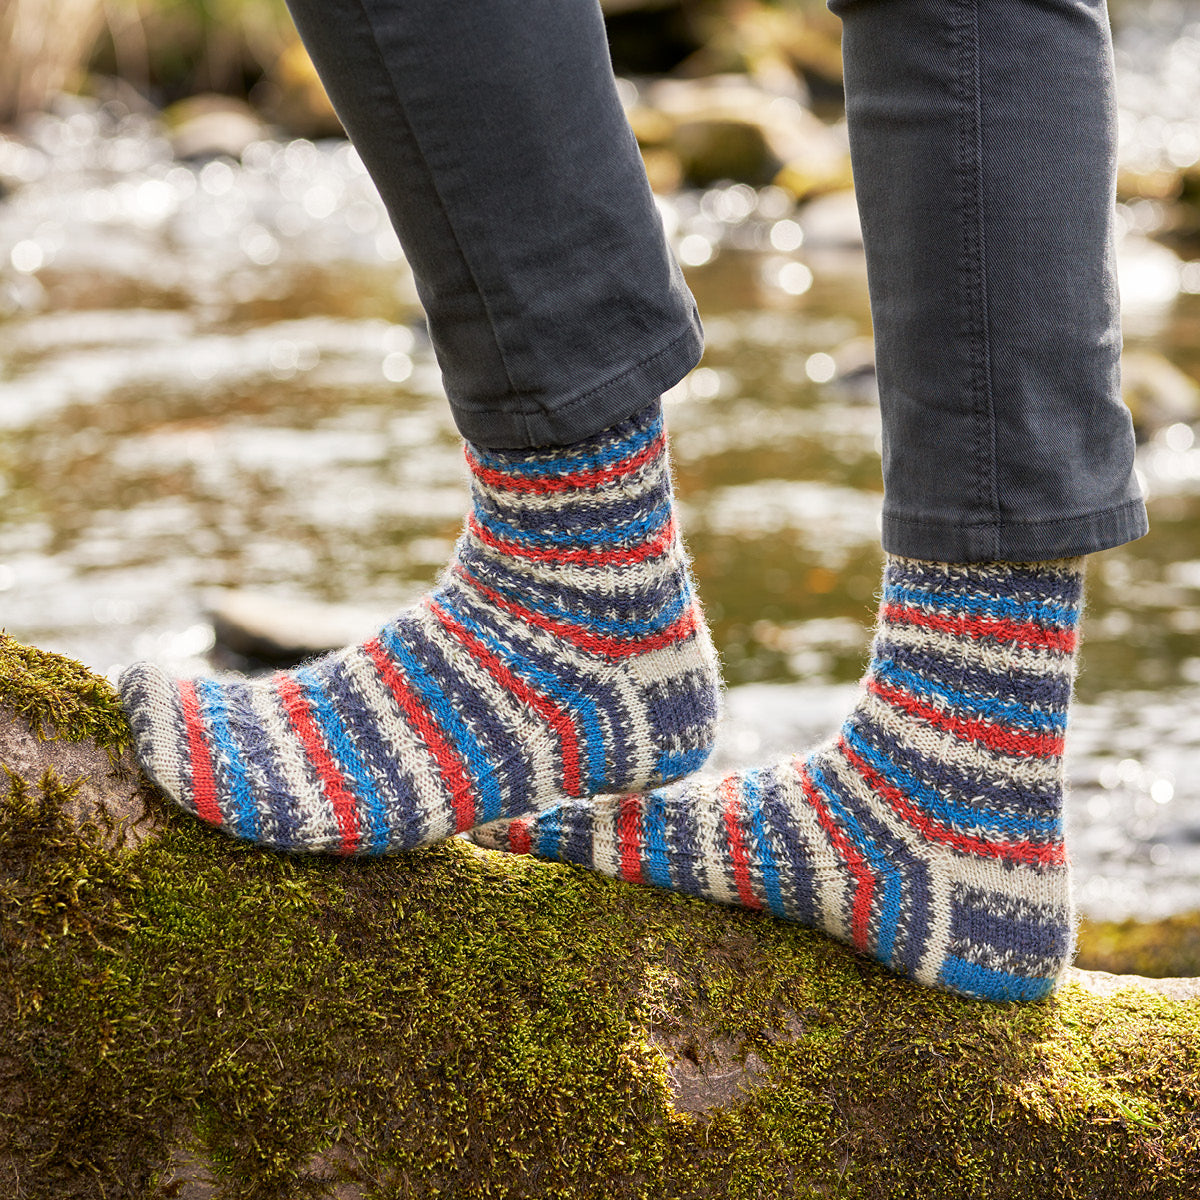 WYS Along The River Bank Sock Pattern Book